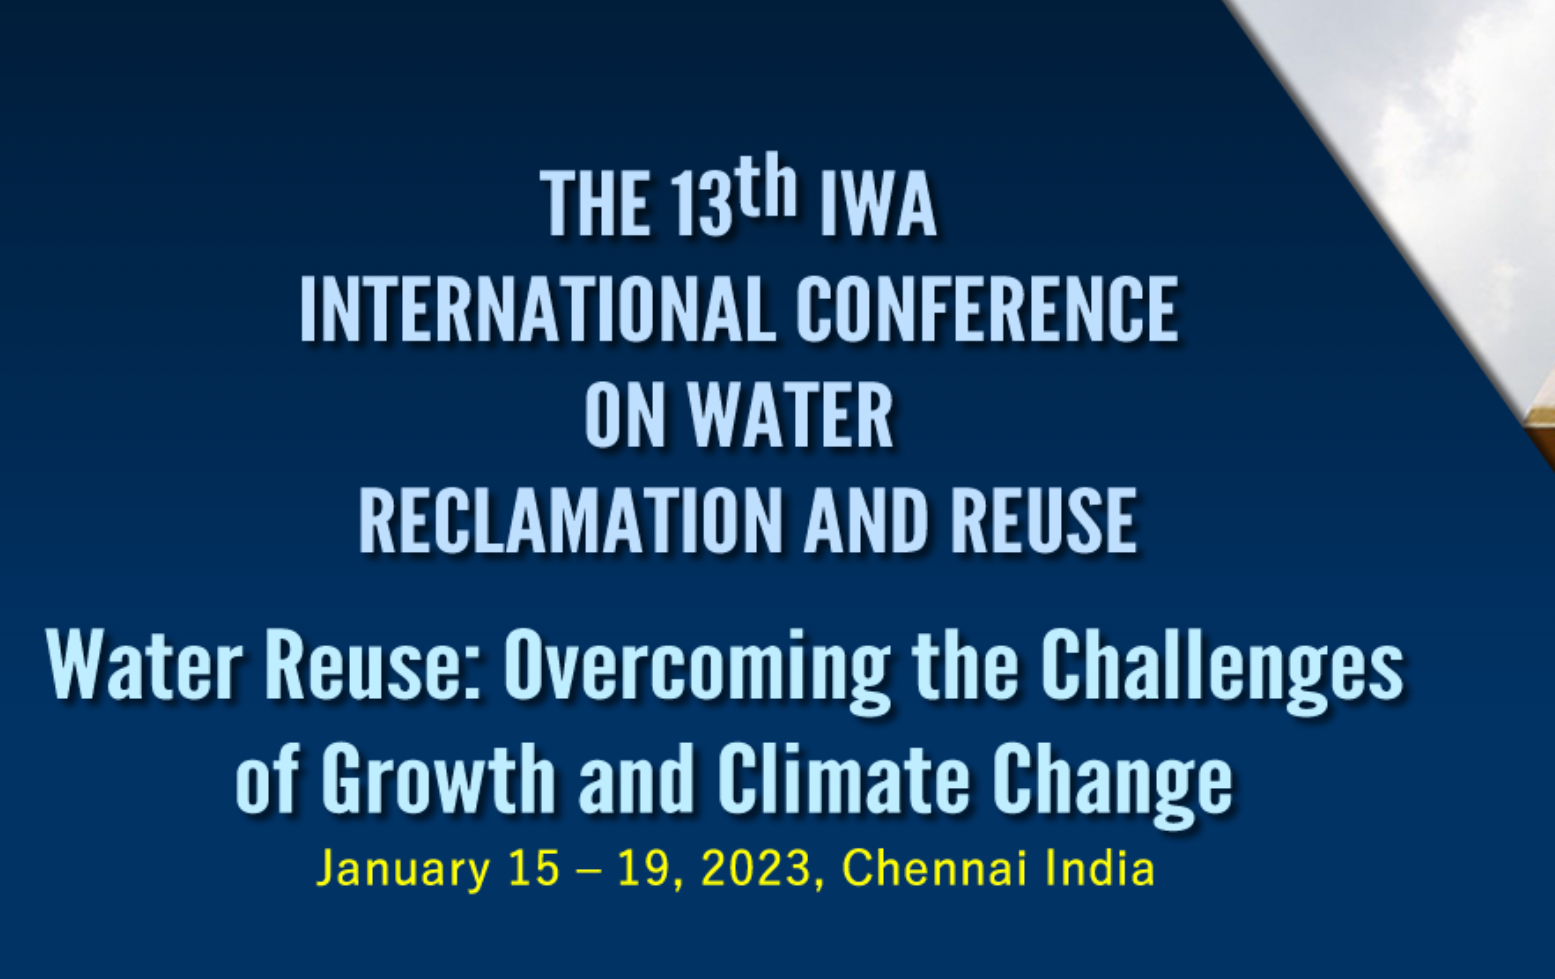 13th IWA International Conference on Water Reclamation and Reuse